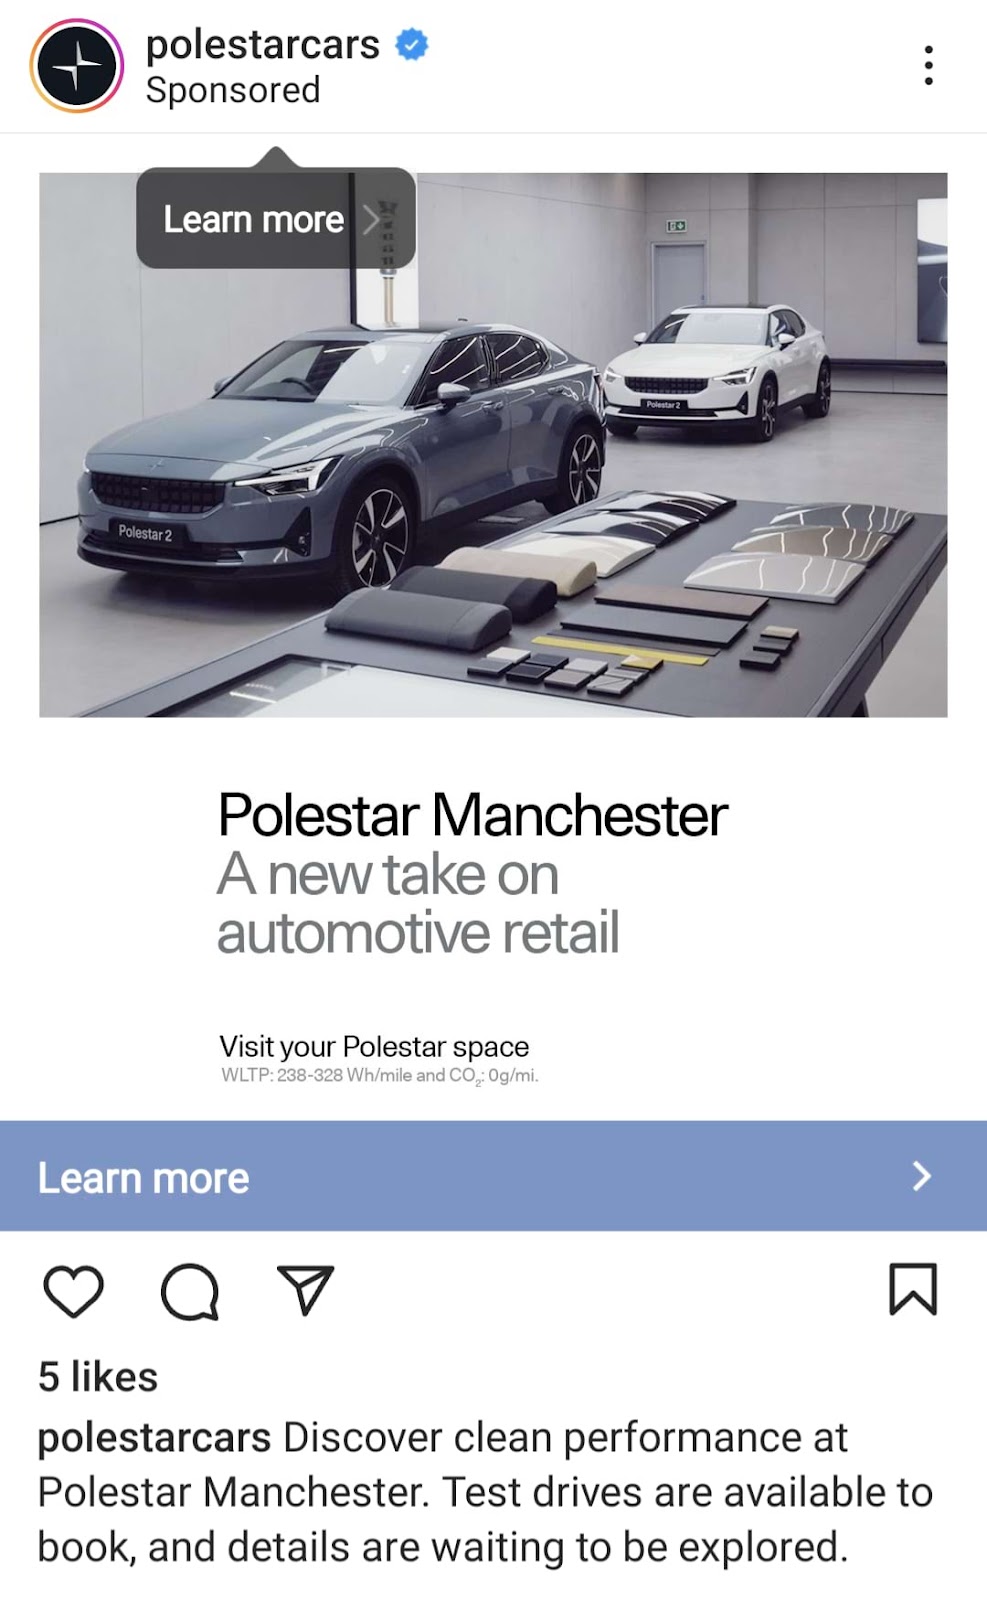 An Instagram ad inviting customers to Polestar Manchester